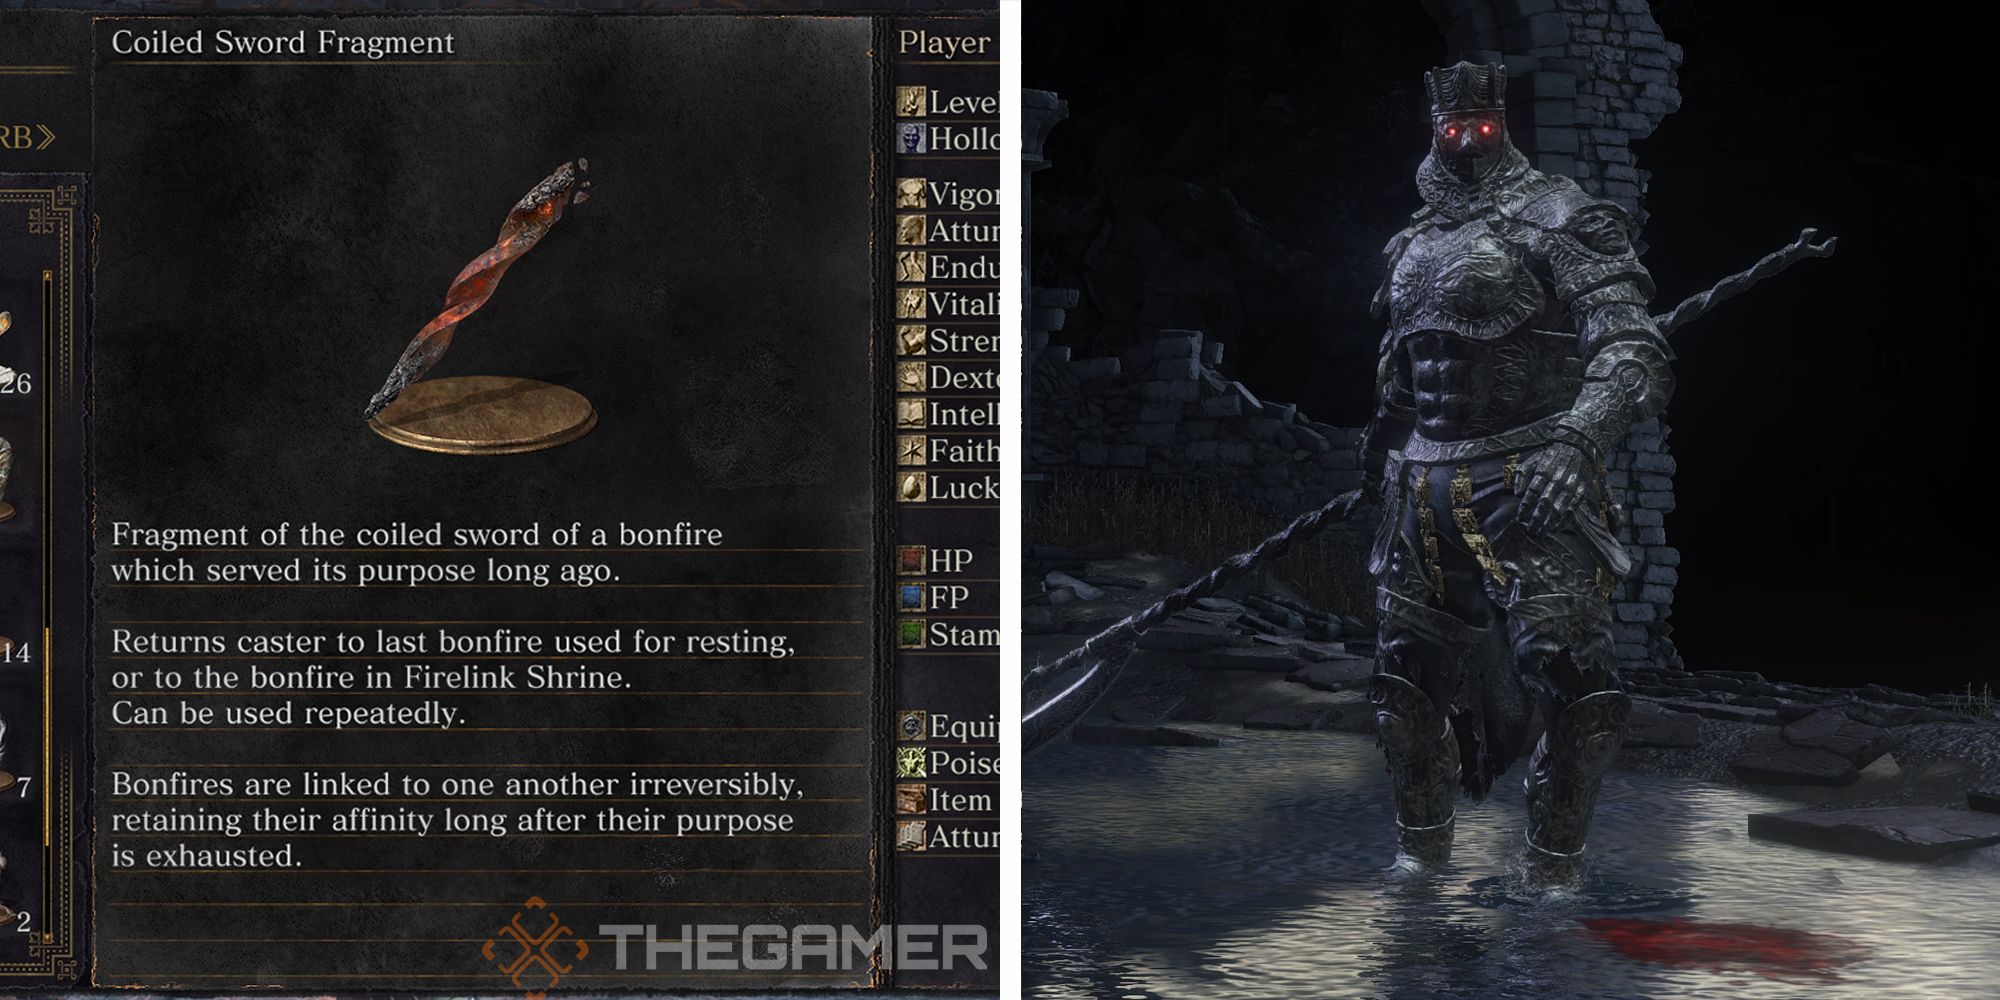 ds3 coiled sword fragment guide title1